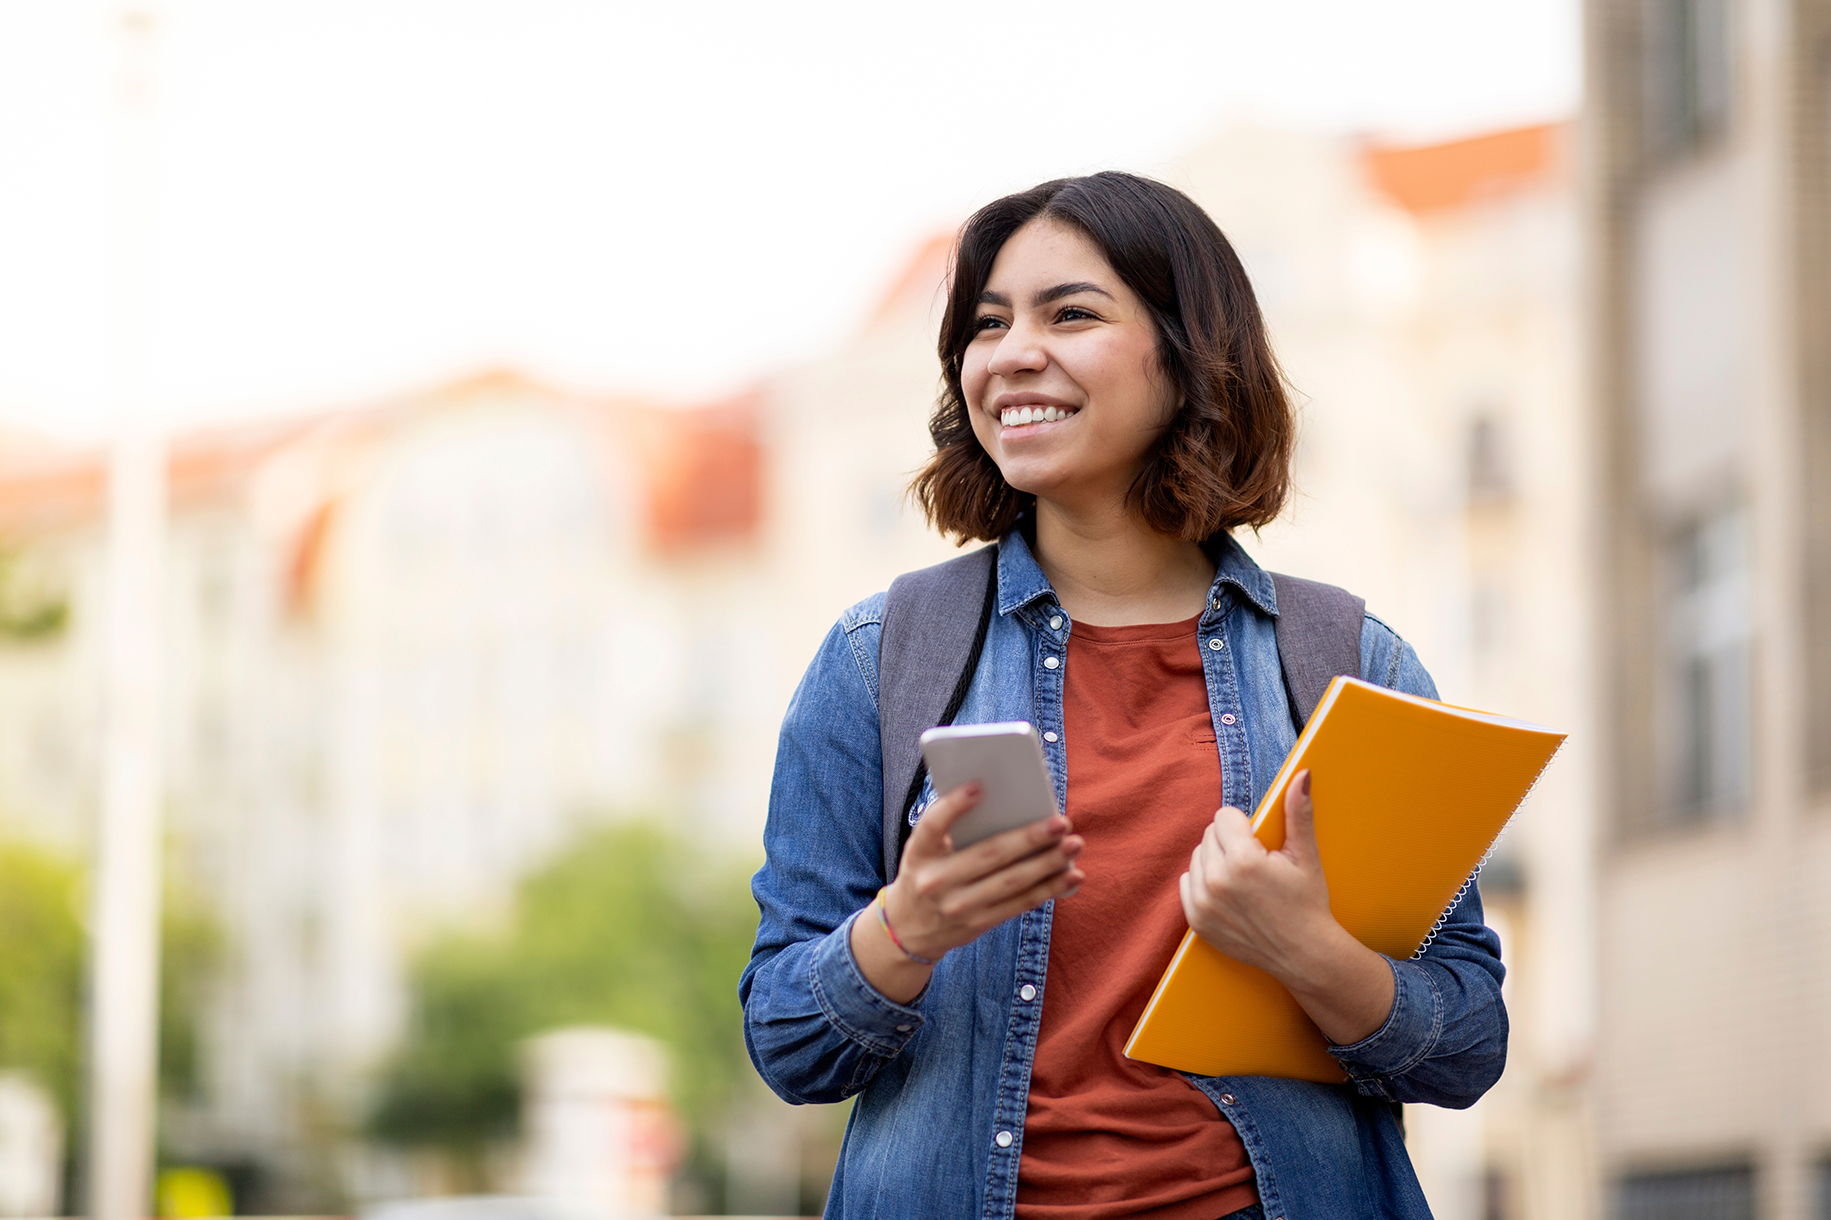 female community college student smiling and walking with phone and notebook